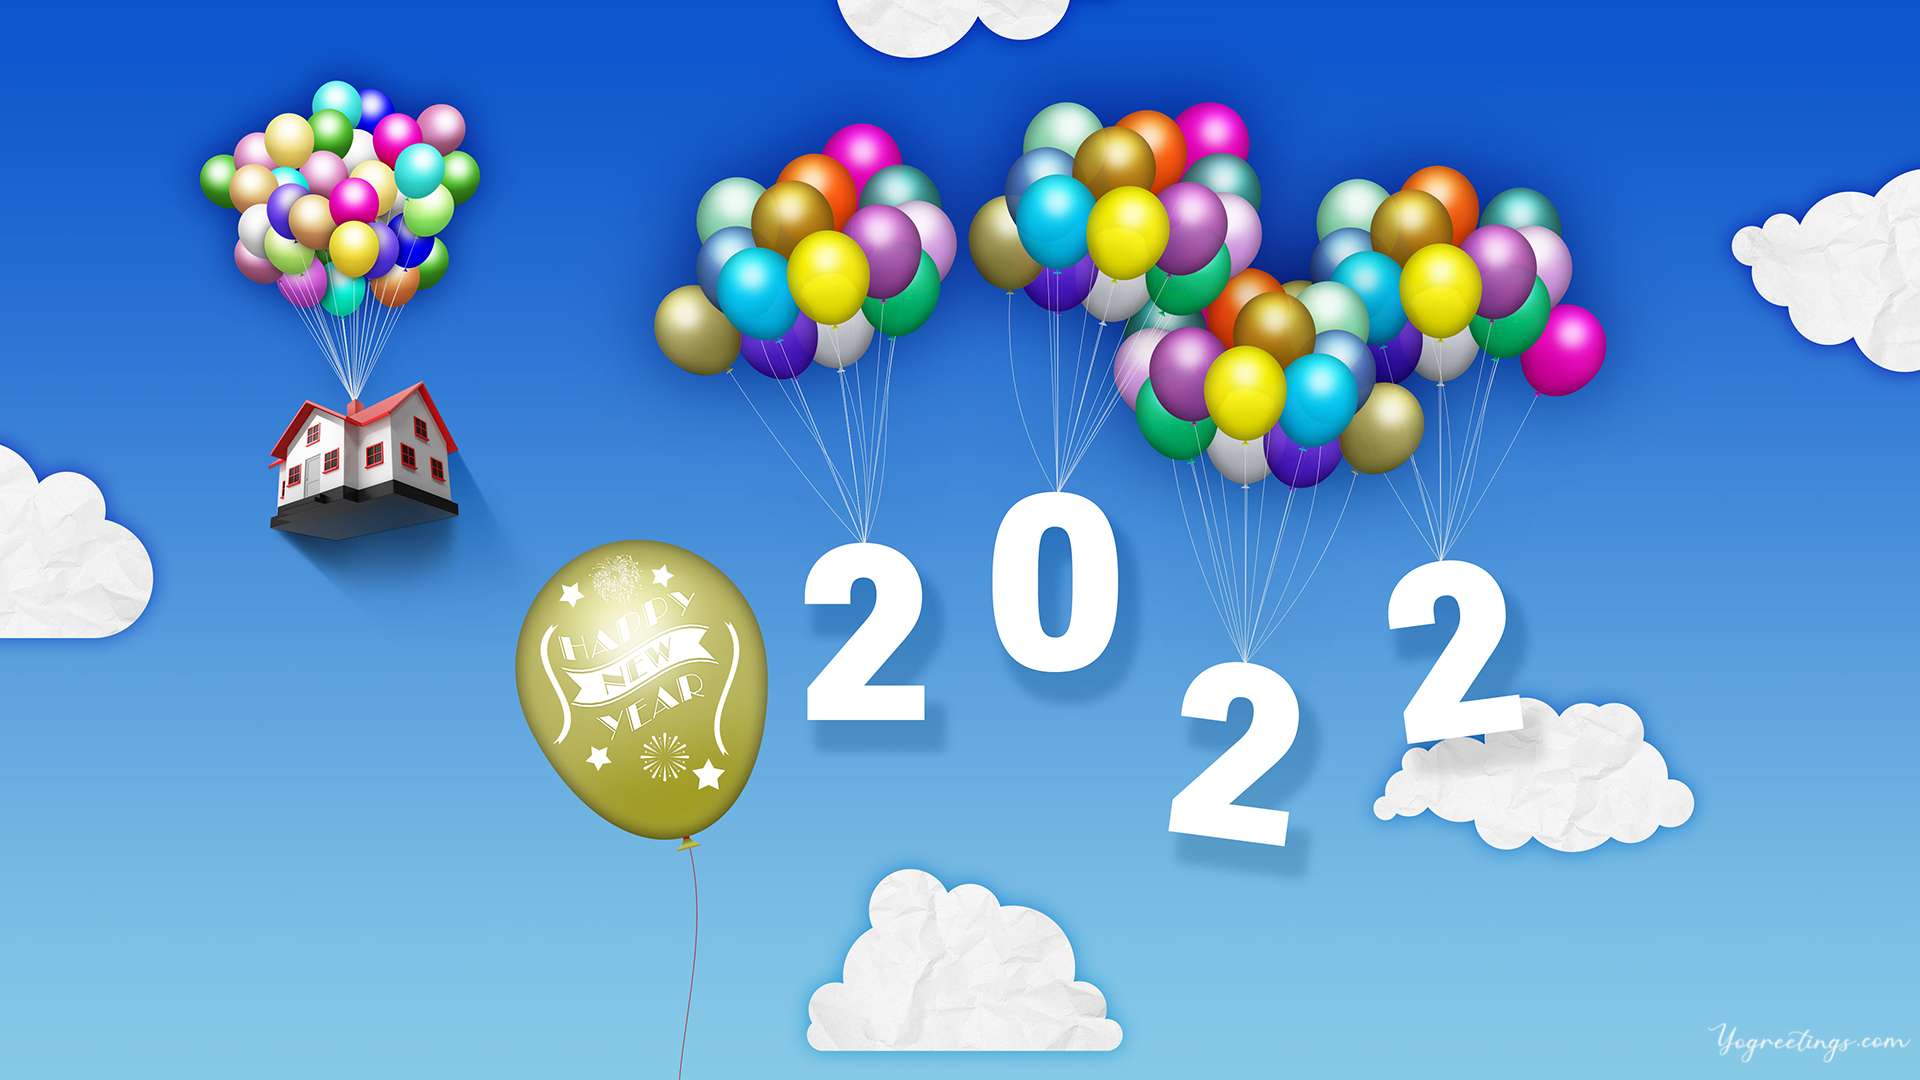 Best happy new year wallpapers hd 2022